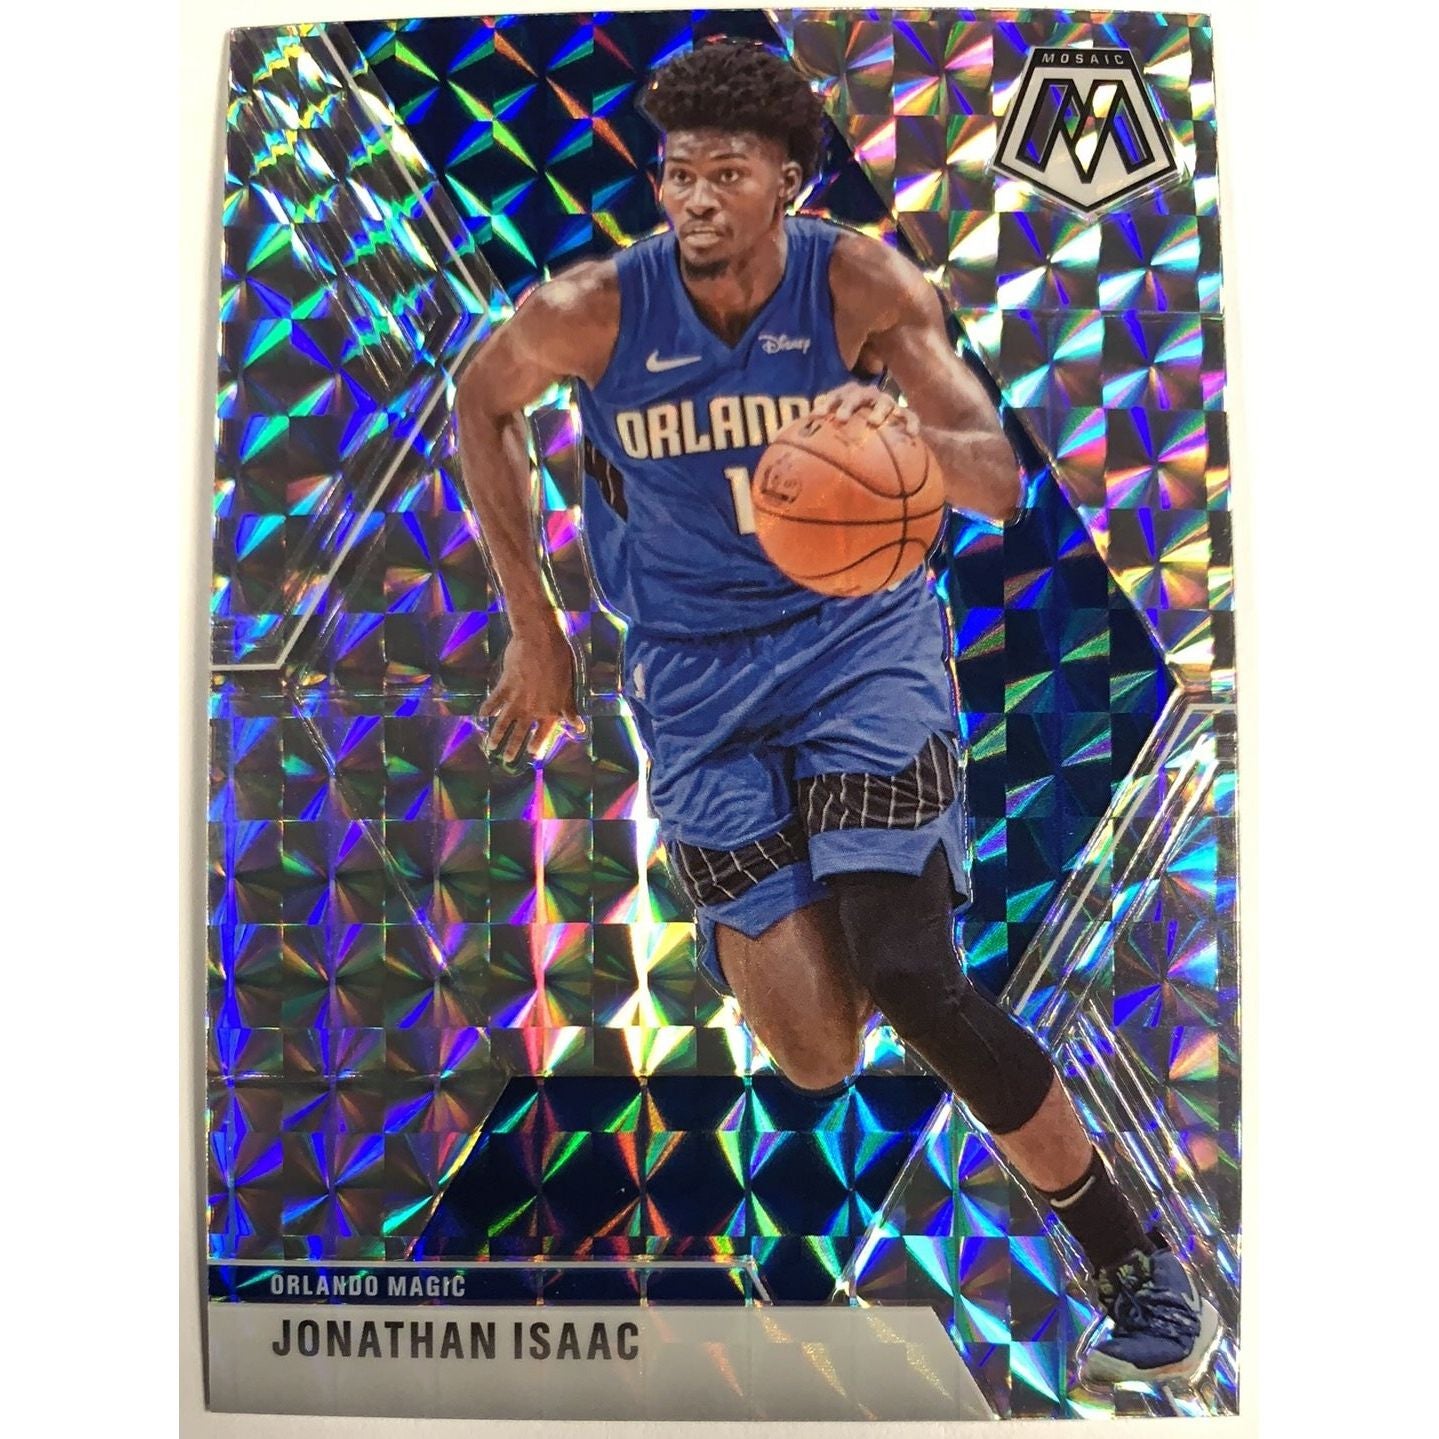  2019-20 Mosaic Jonathan Isaac Silver Prizm  Local Legends Cards & Collectibles